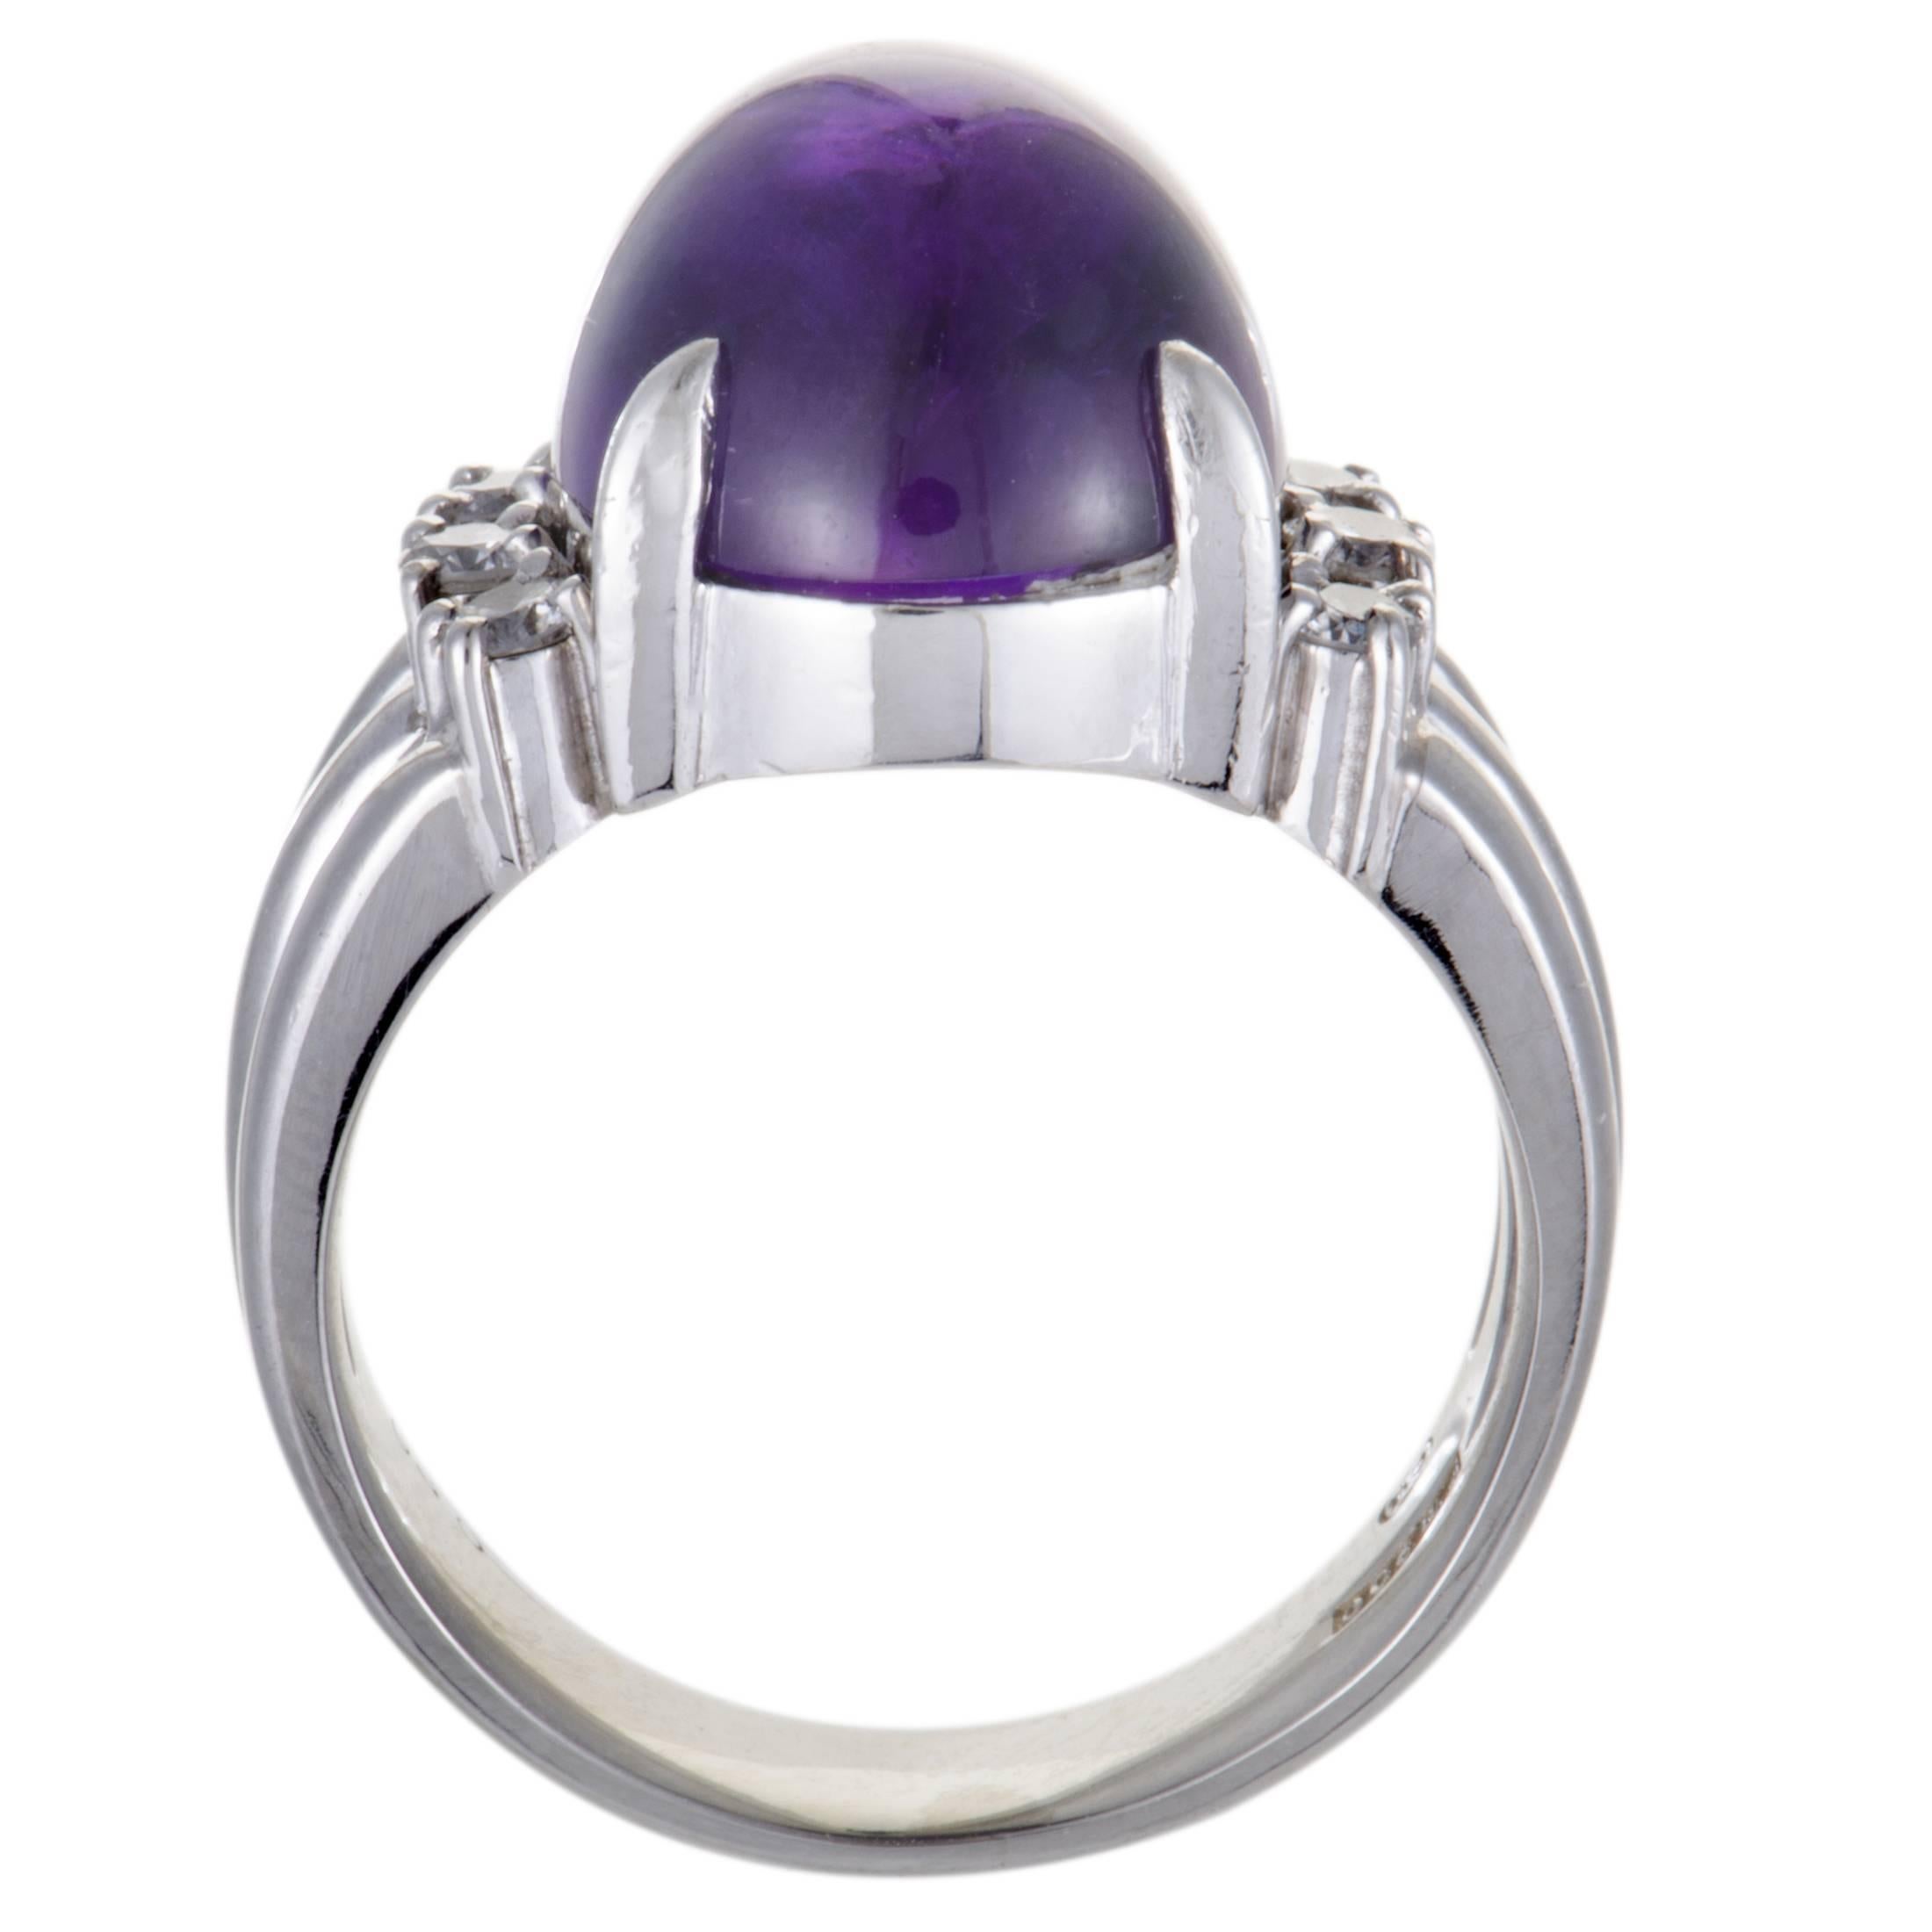 Boasting an eye-catching pop of color in the form of a stunning amethyst, this splendid platinum ring offers a compellingly fashionable appearance. The endearing beauty of the ring is accentuated by glistening diamond stones that amount to 0.30